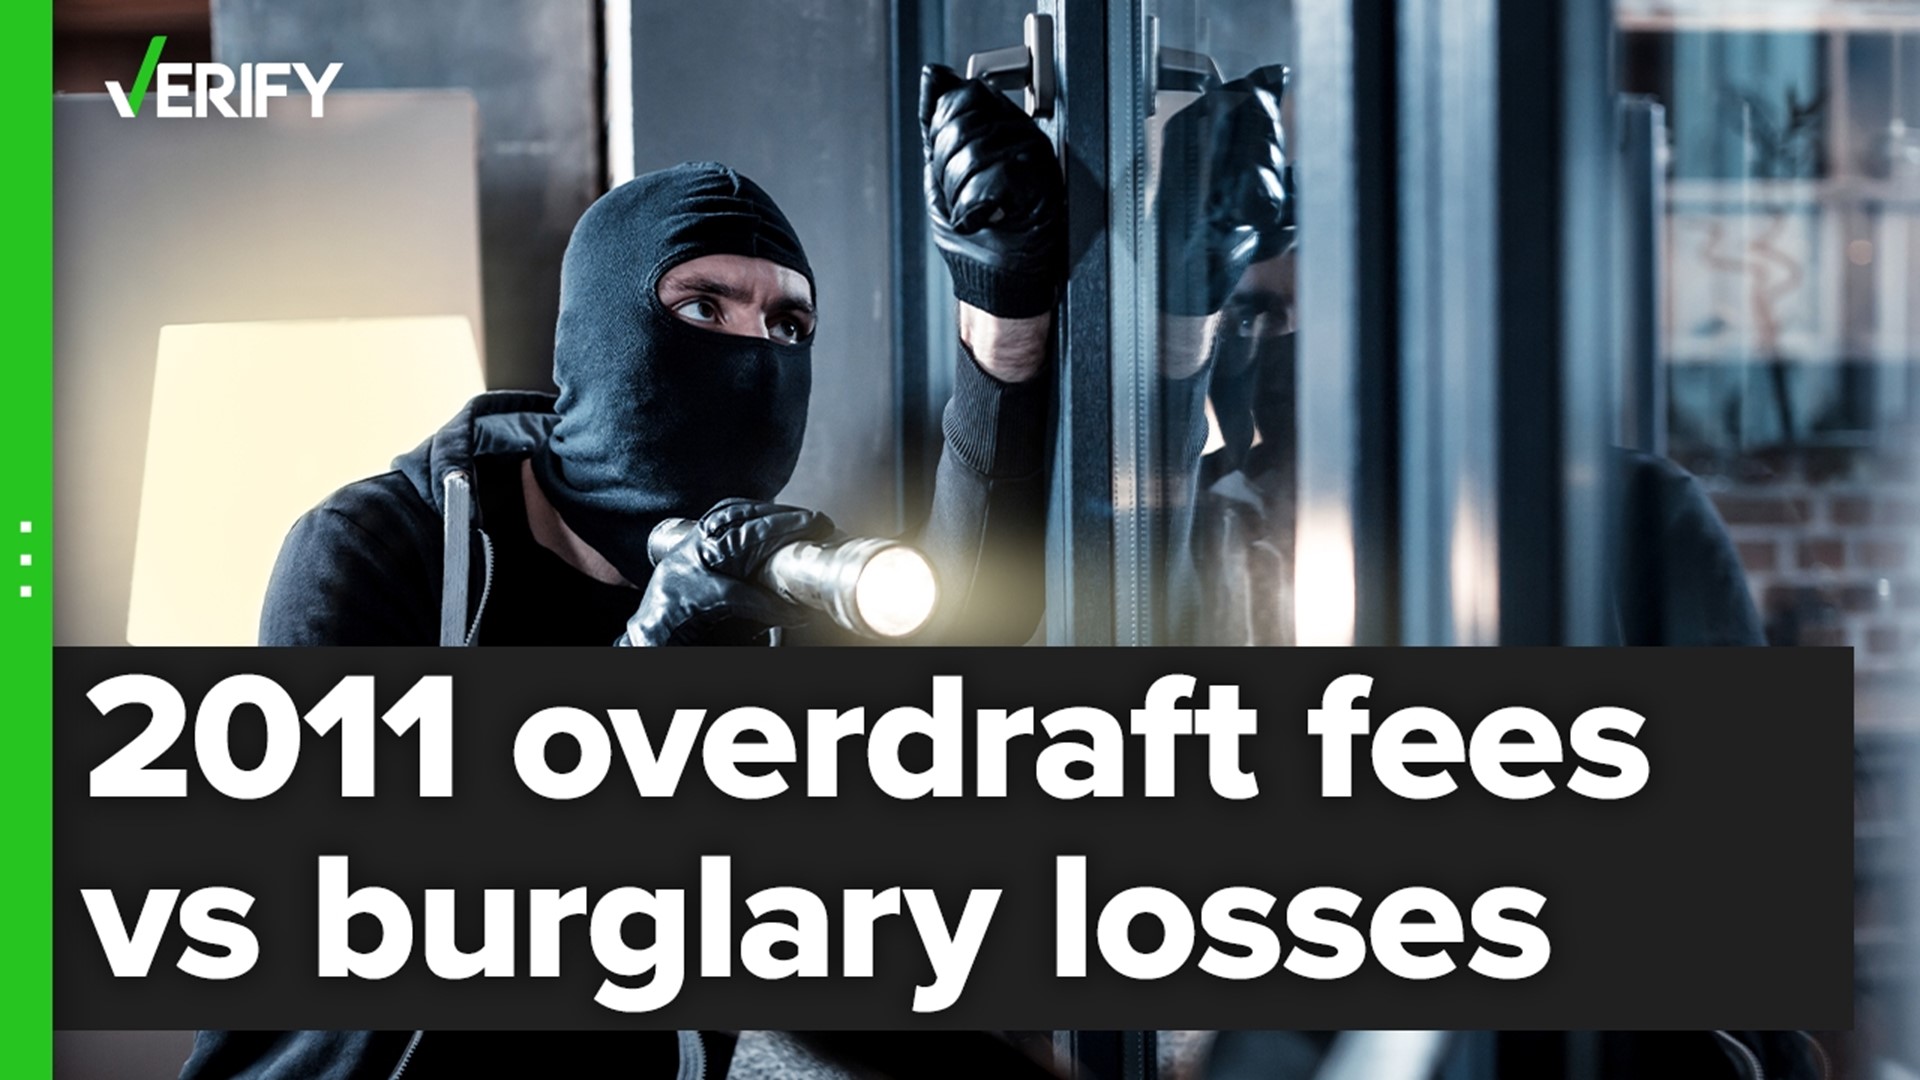 Did overdraft fees cost Americans more than six times as much as burglaries in 2011? The VERIFY team confirms this is true.